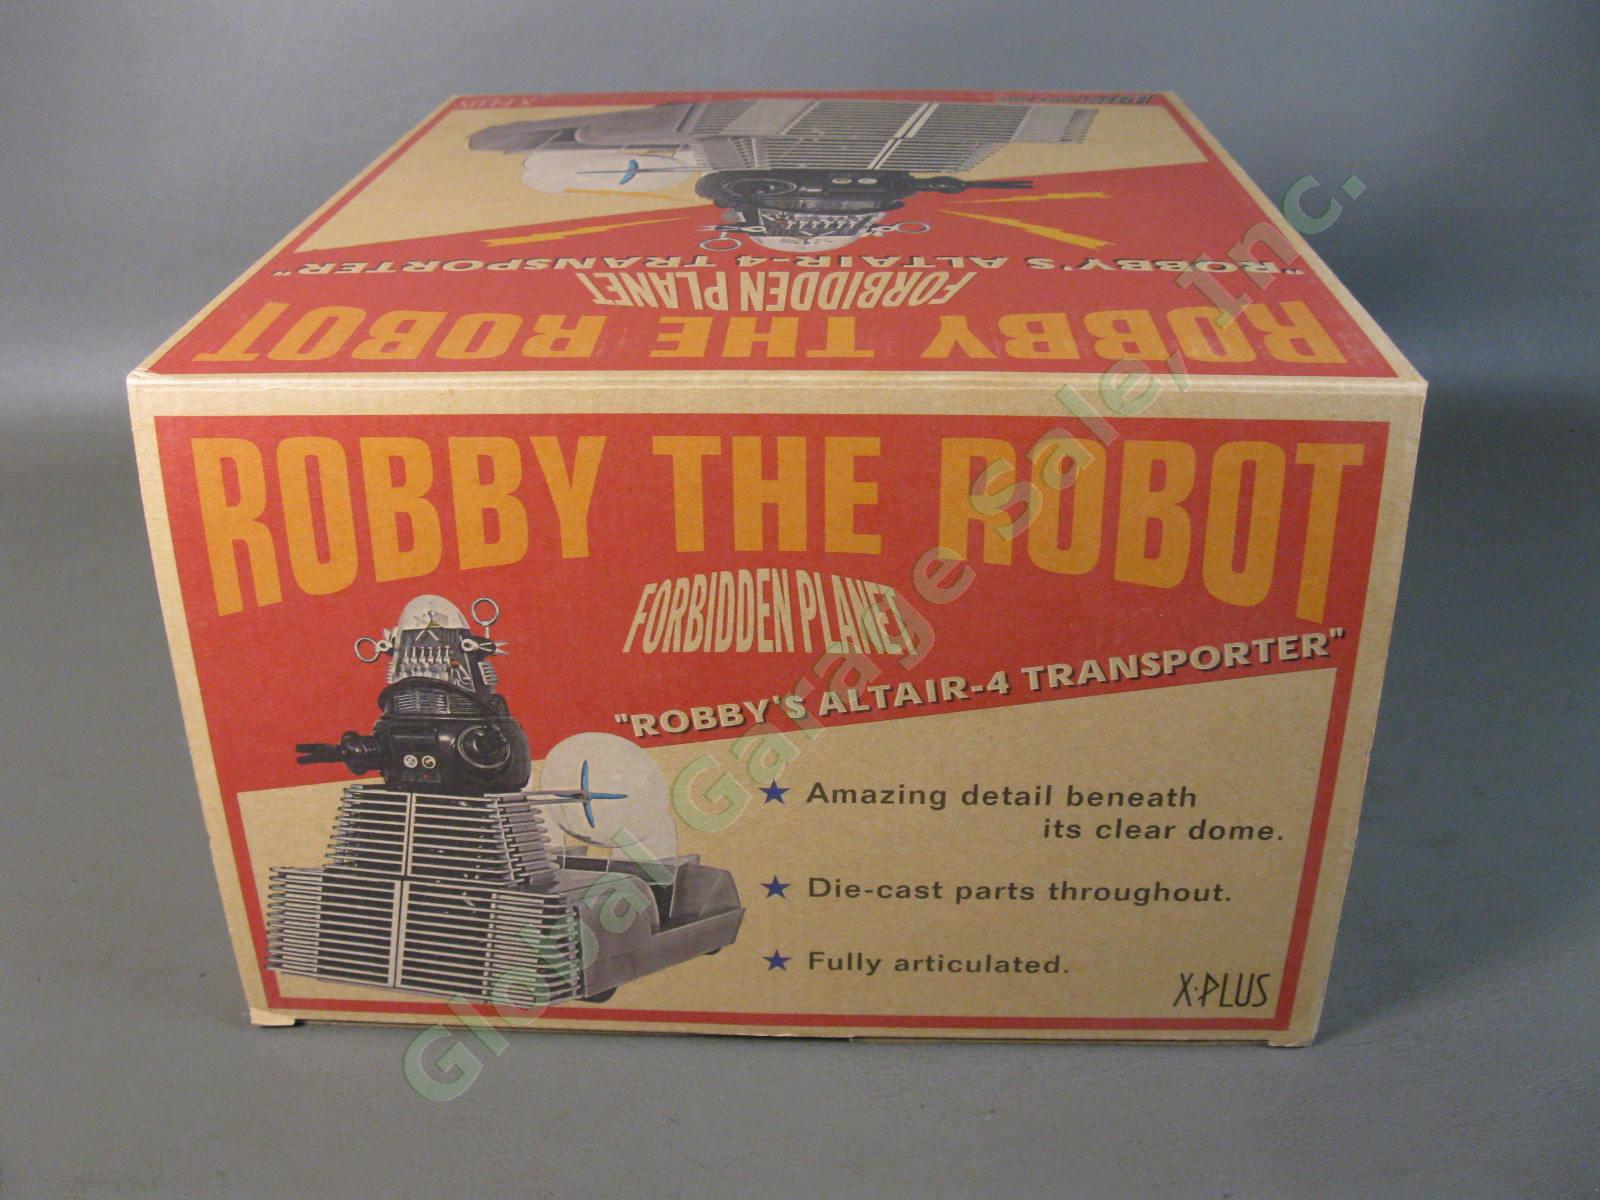 1956 Forbidden Planet Robby the Robot & Altair-4 Transporter 2006 X-Plus Sci-Fi 2